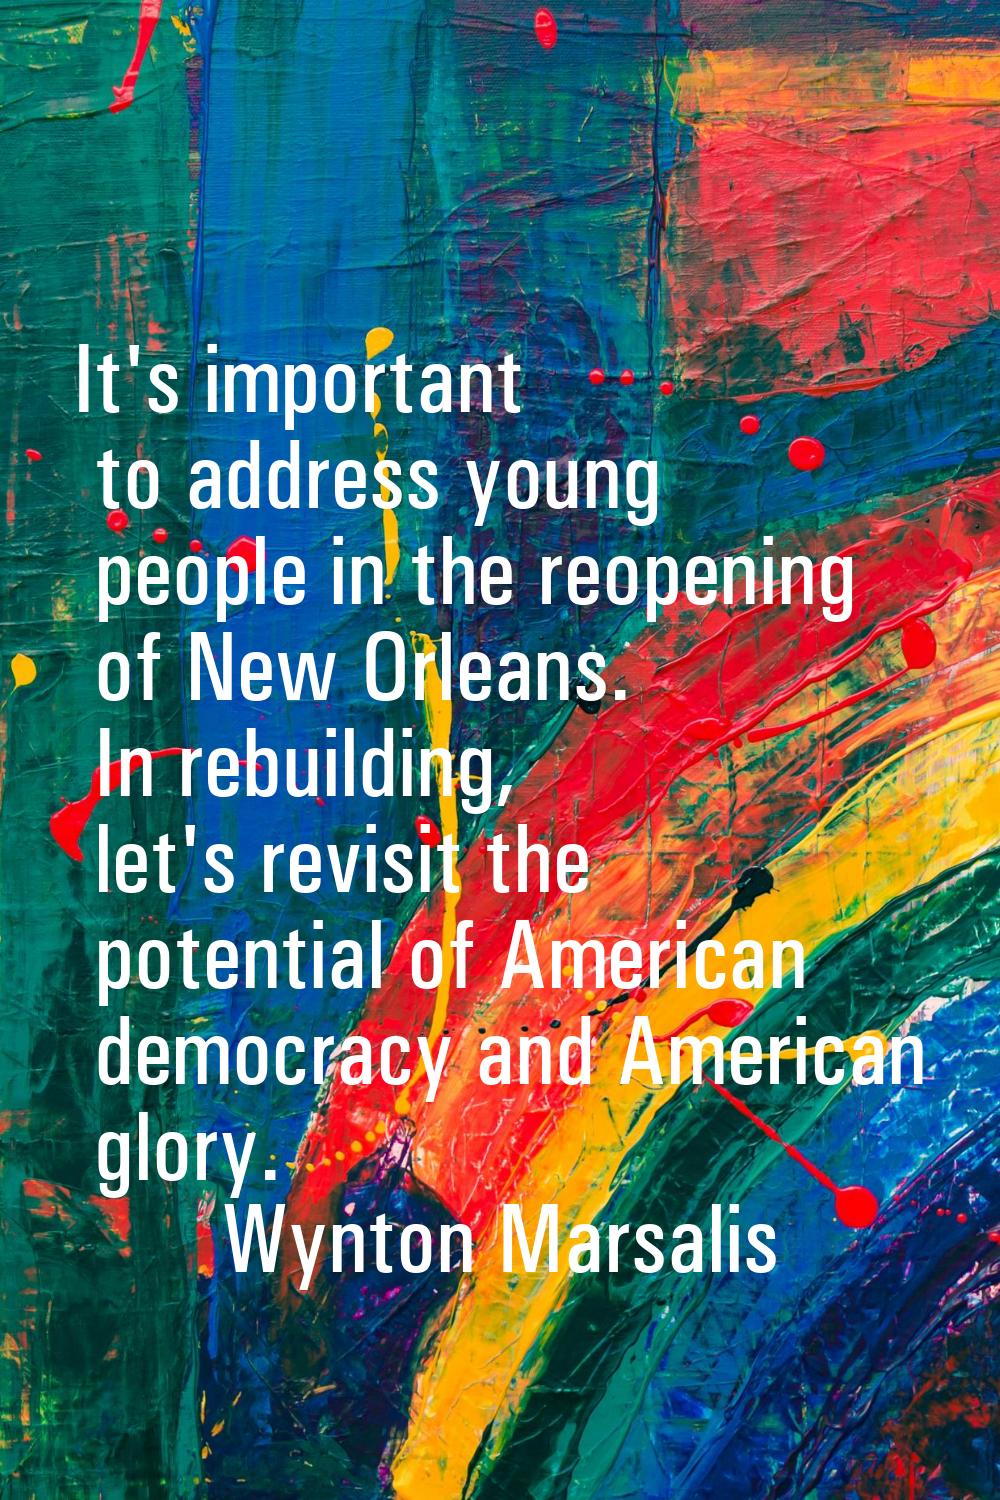 It's important to address young people in the reopening of New Orleans. In rebuilding, let's revisi